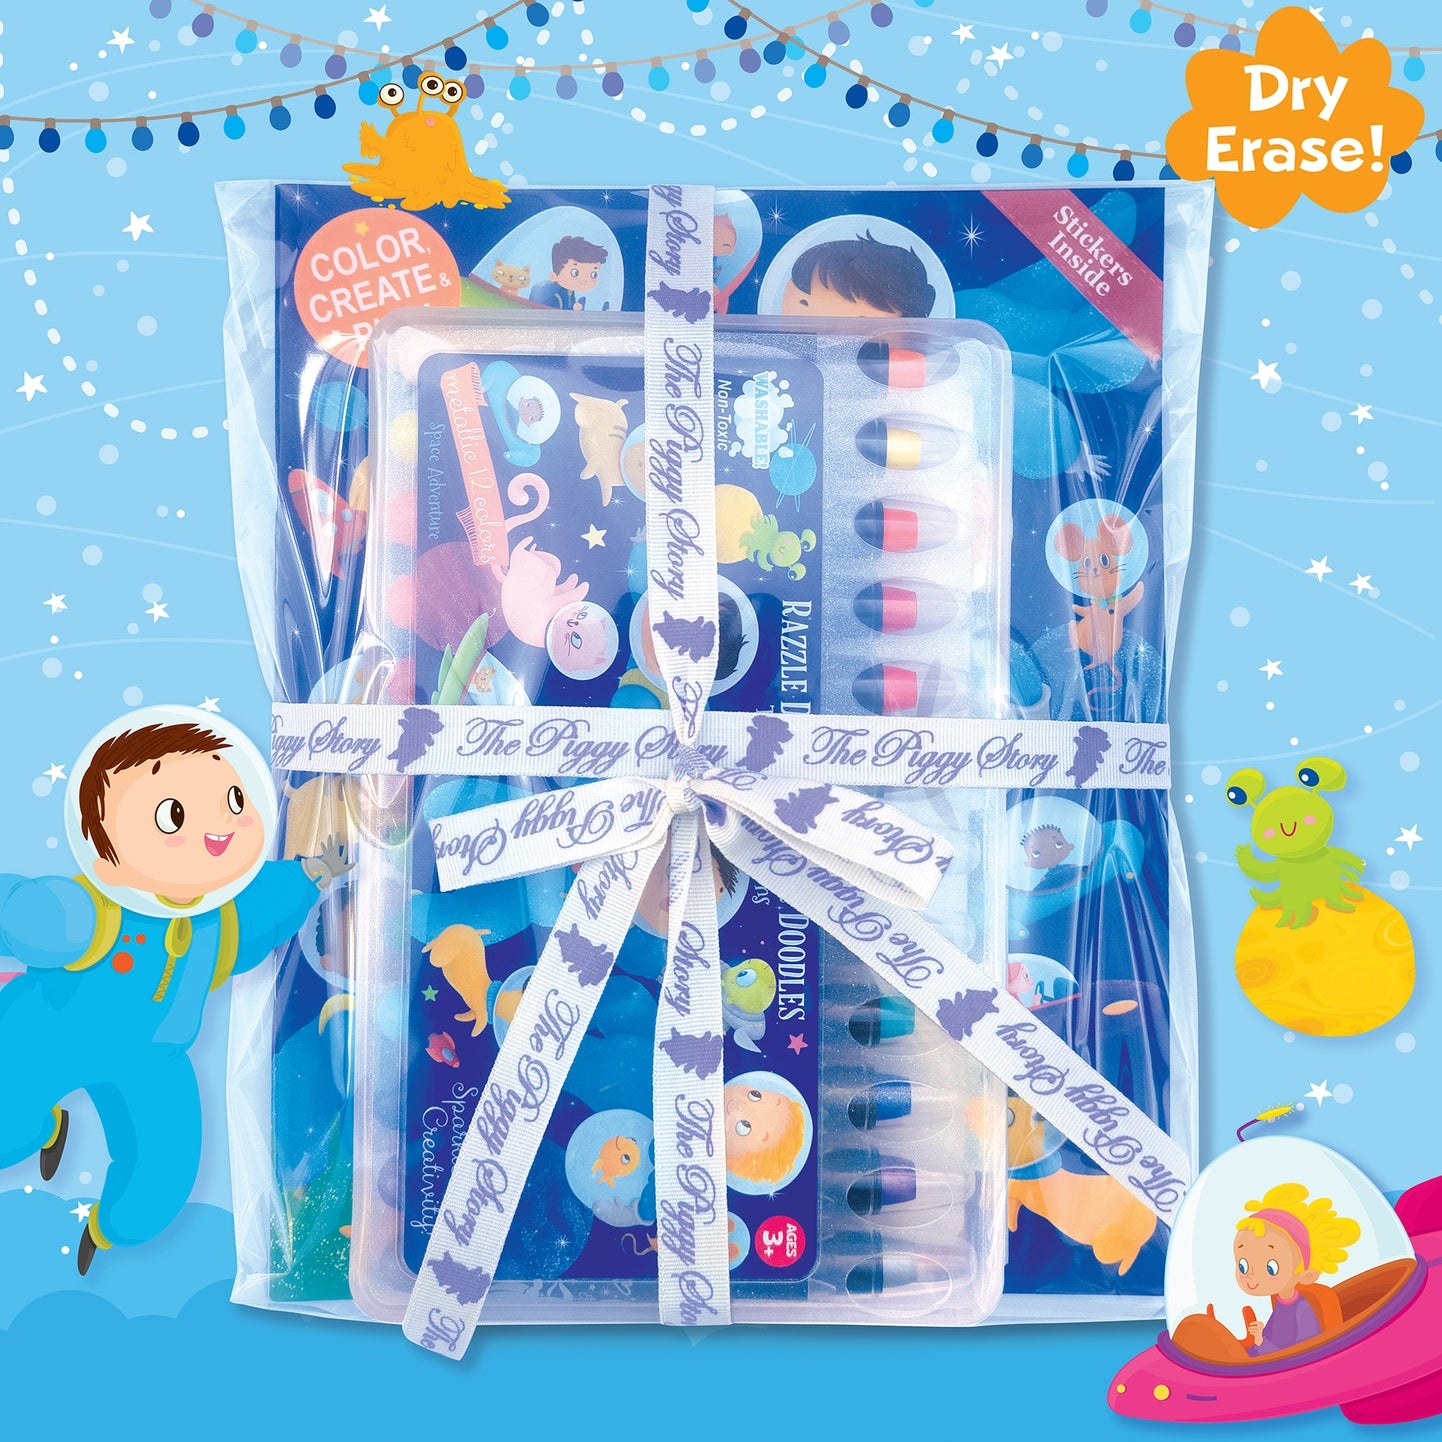 Glitter Space Dry Erase Coloring Gift Set - Twinkle Twinkle Little One